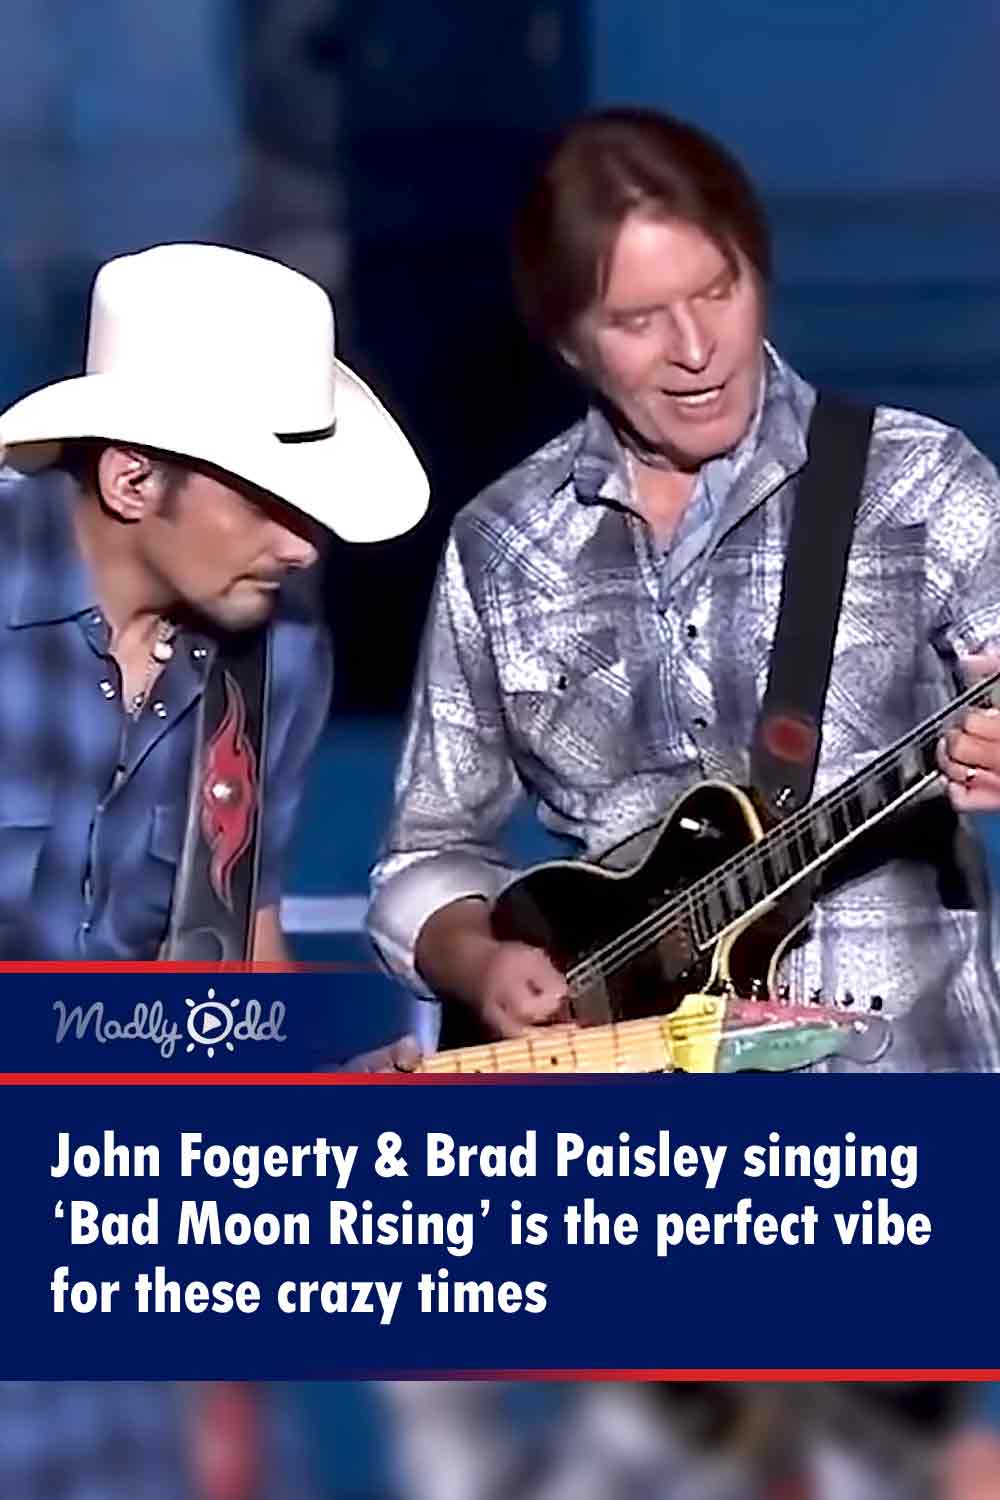 John Fogerty & Brad Paisley singing ‘Bad Moon Rising’ is the perfect vibe for these crazy times